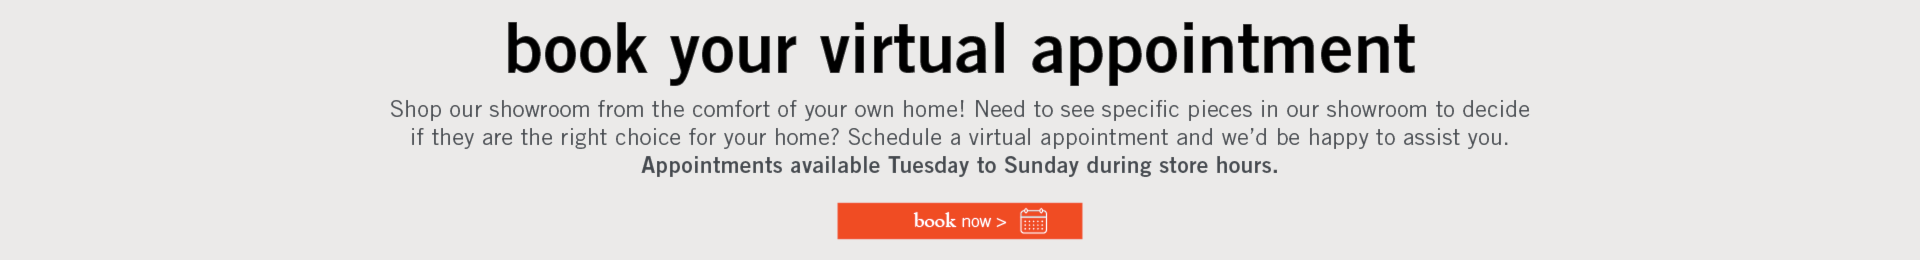 Book a virtual appointment